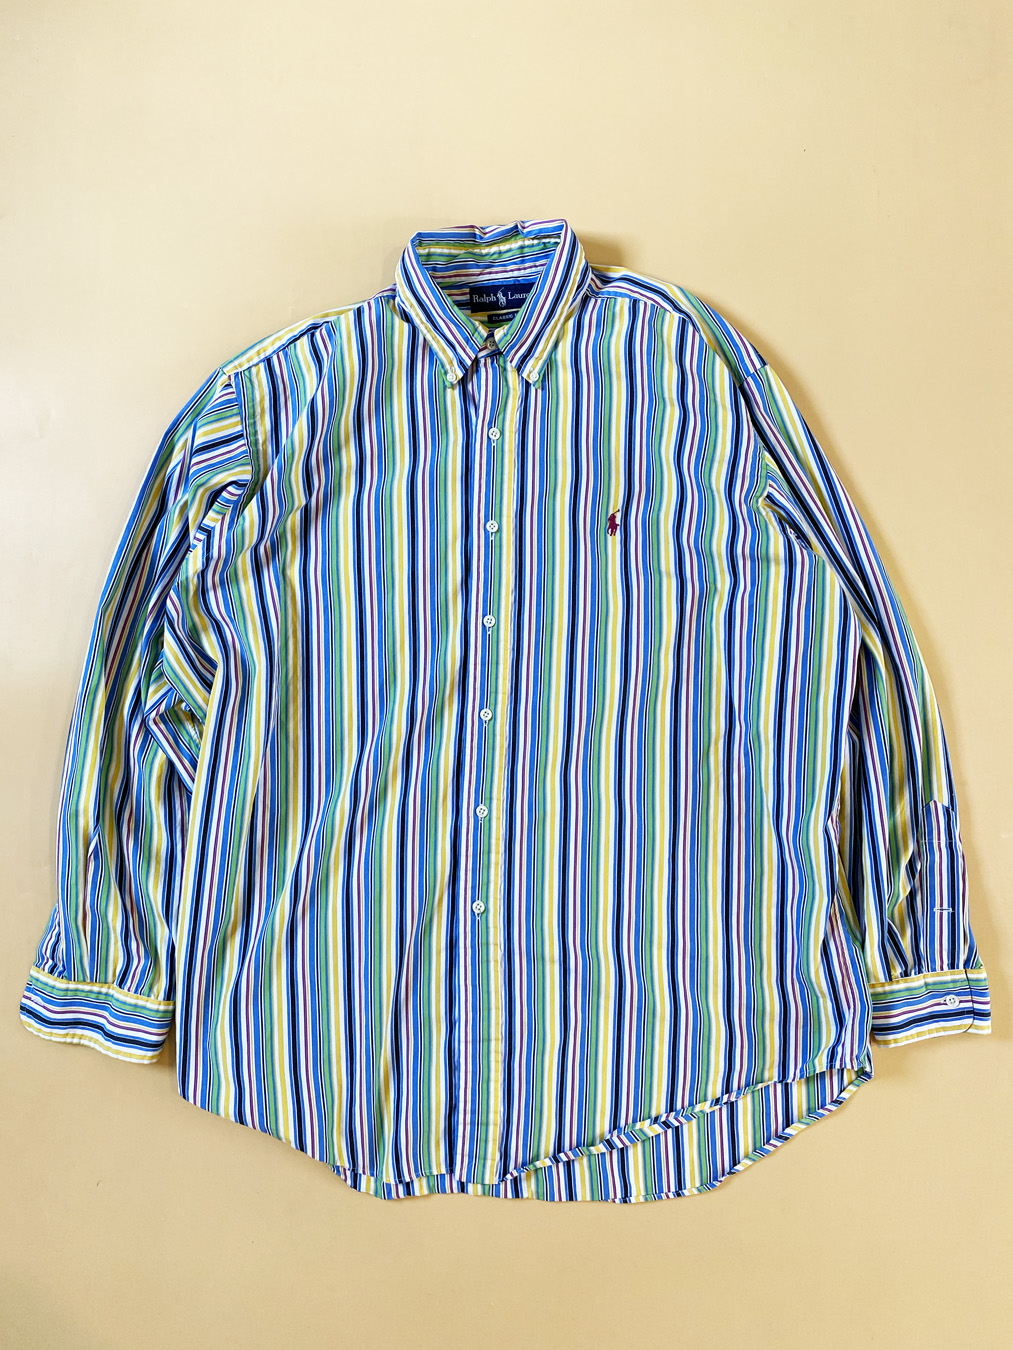 Polo Ralph Lauren Yellow Striped Long Sleeve Button Up - 5 Star Vintage